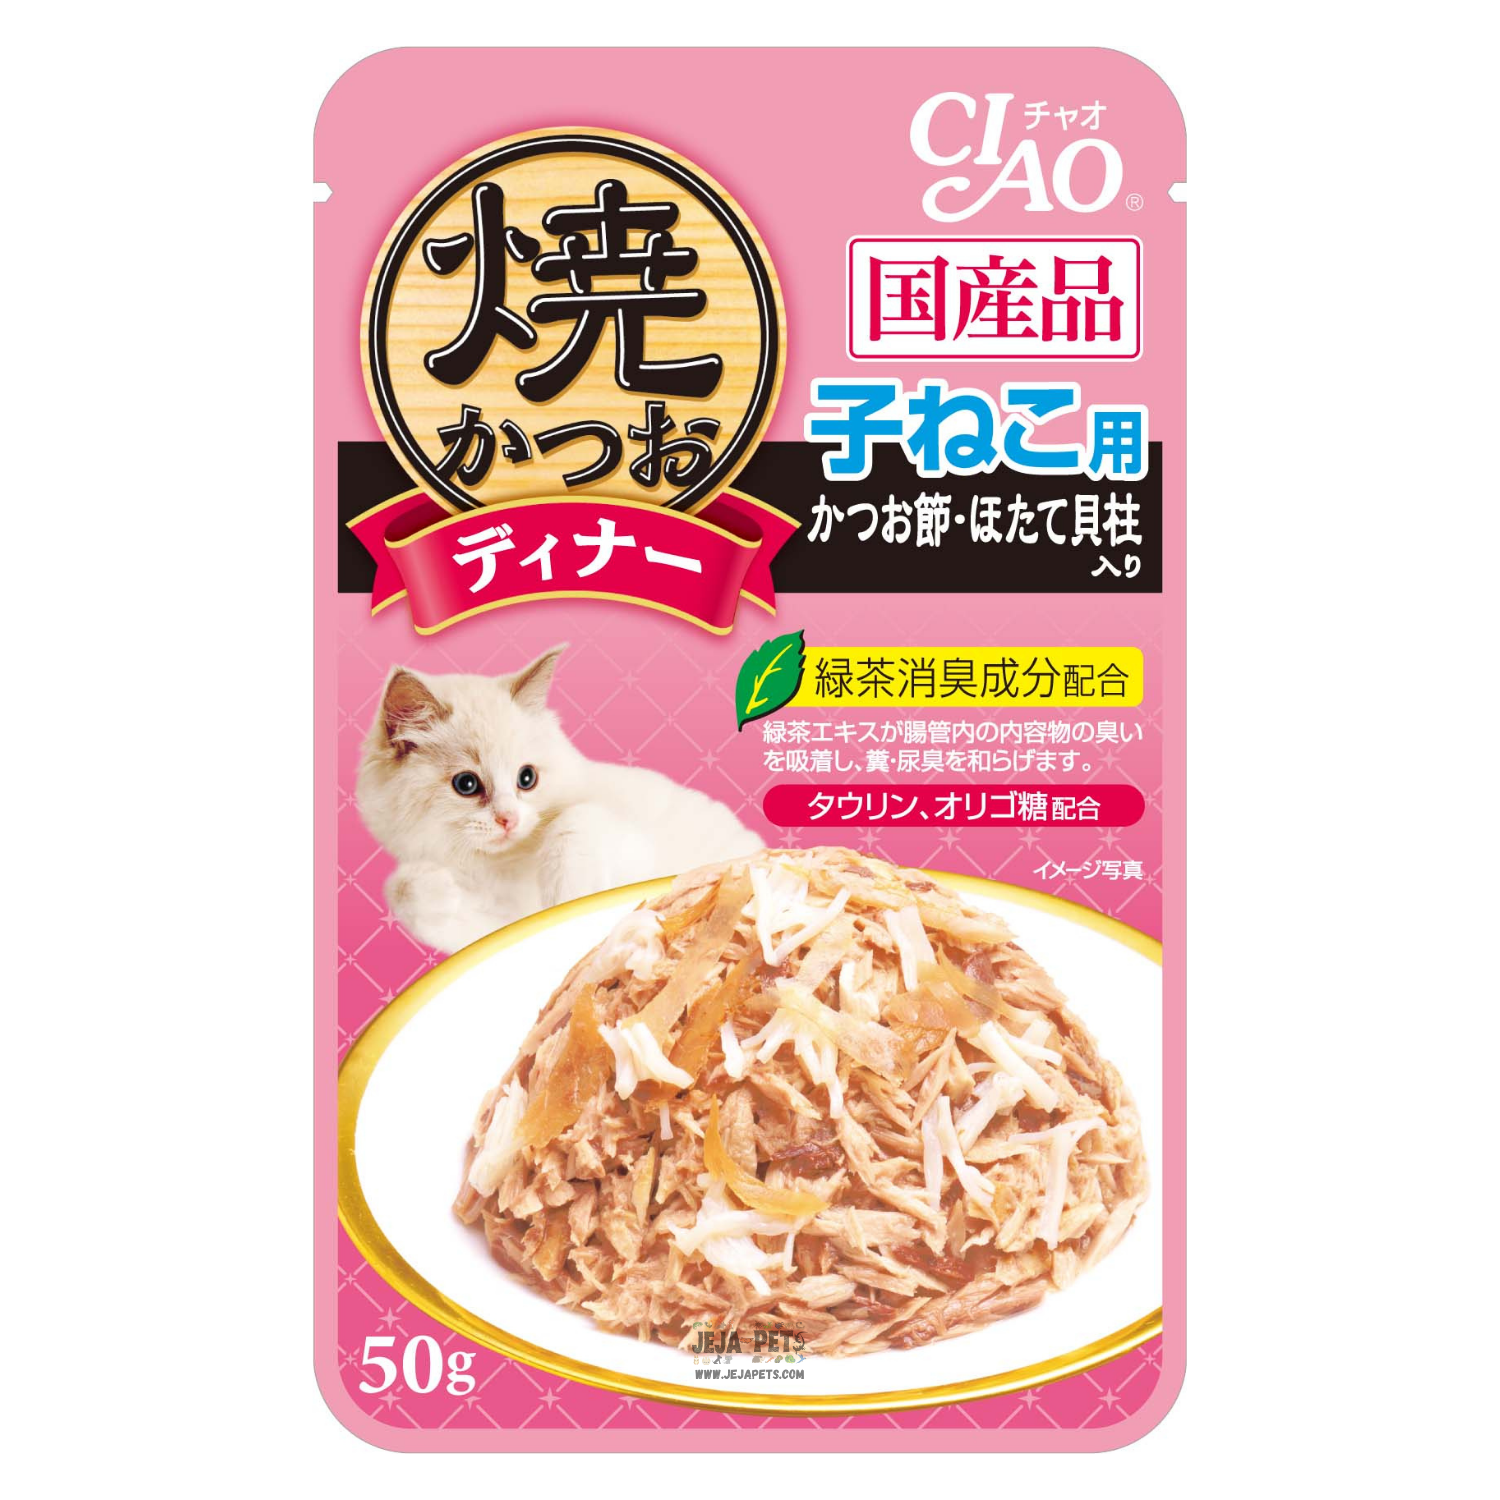 Ciao Grilled Tuna Flakes with Sliced Bonito & Scallop in Jelly for Kitten Pouch - 50g